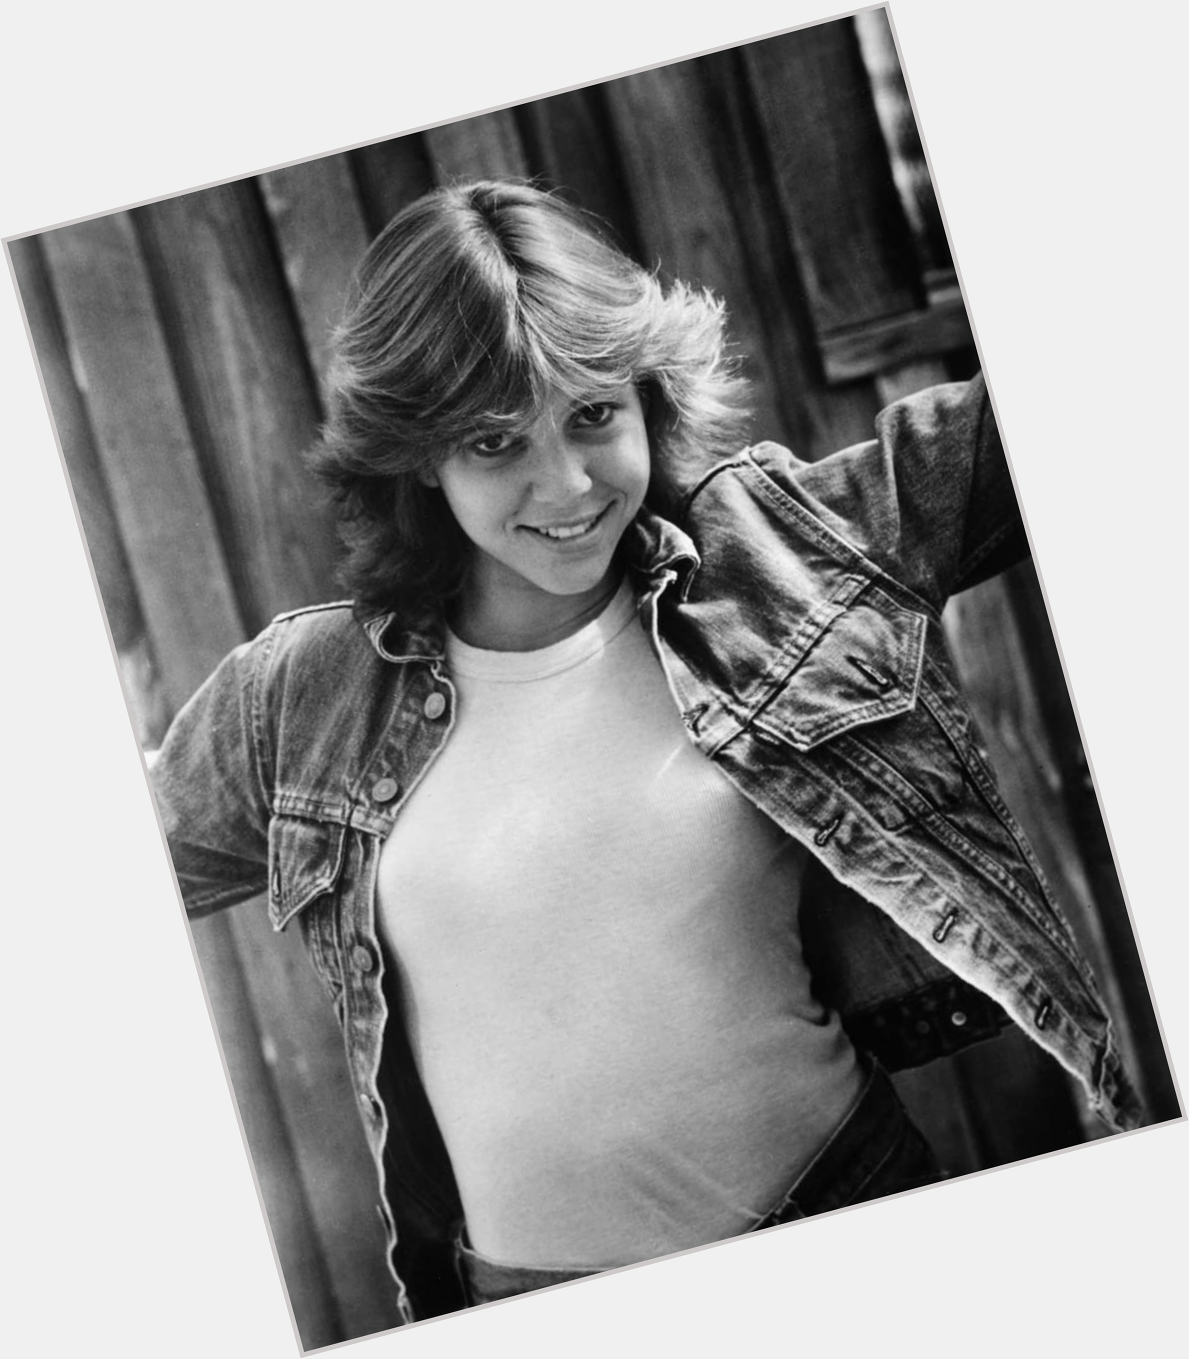 Happy Birthday to one of my first crushes - Kristy McNichol. 